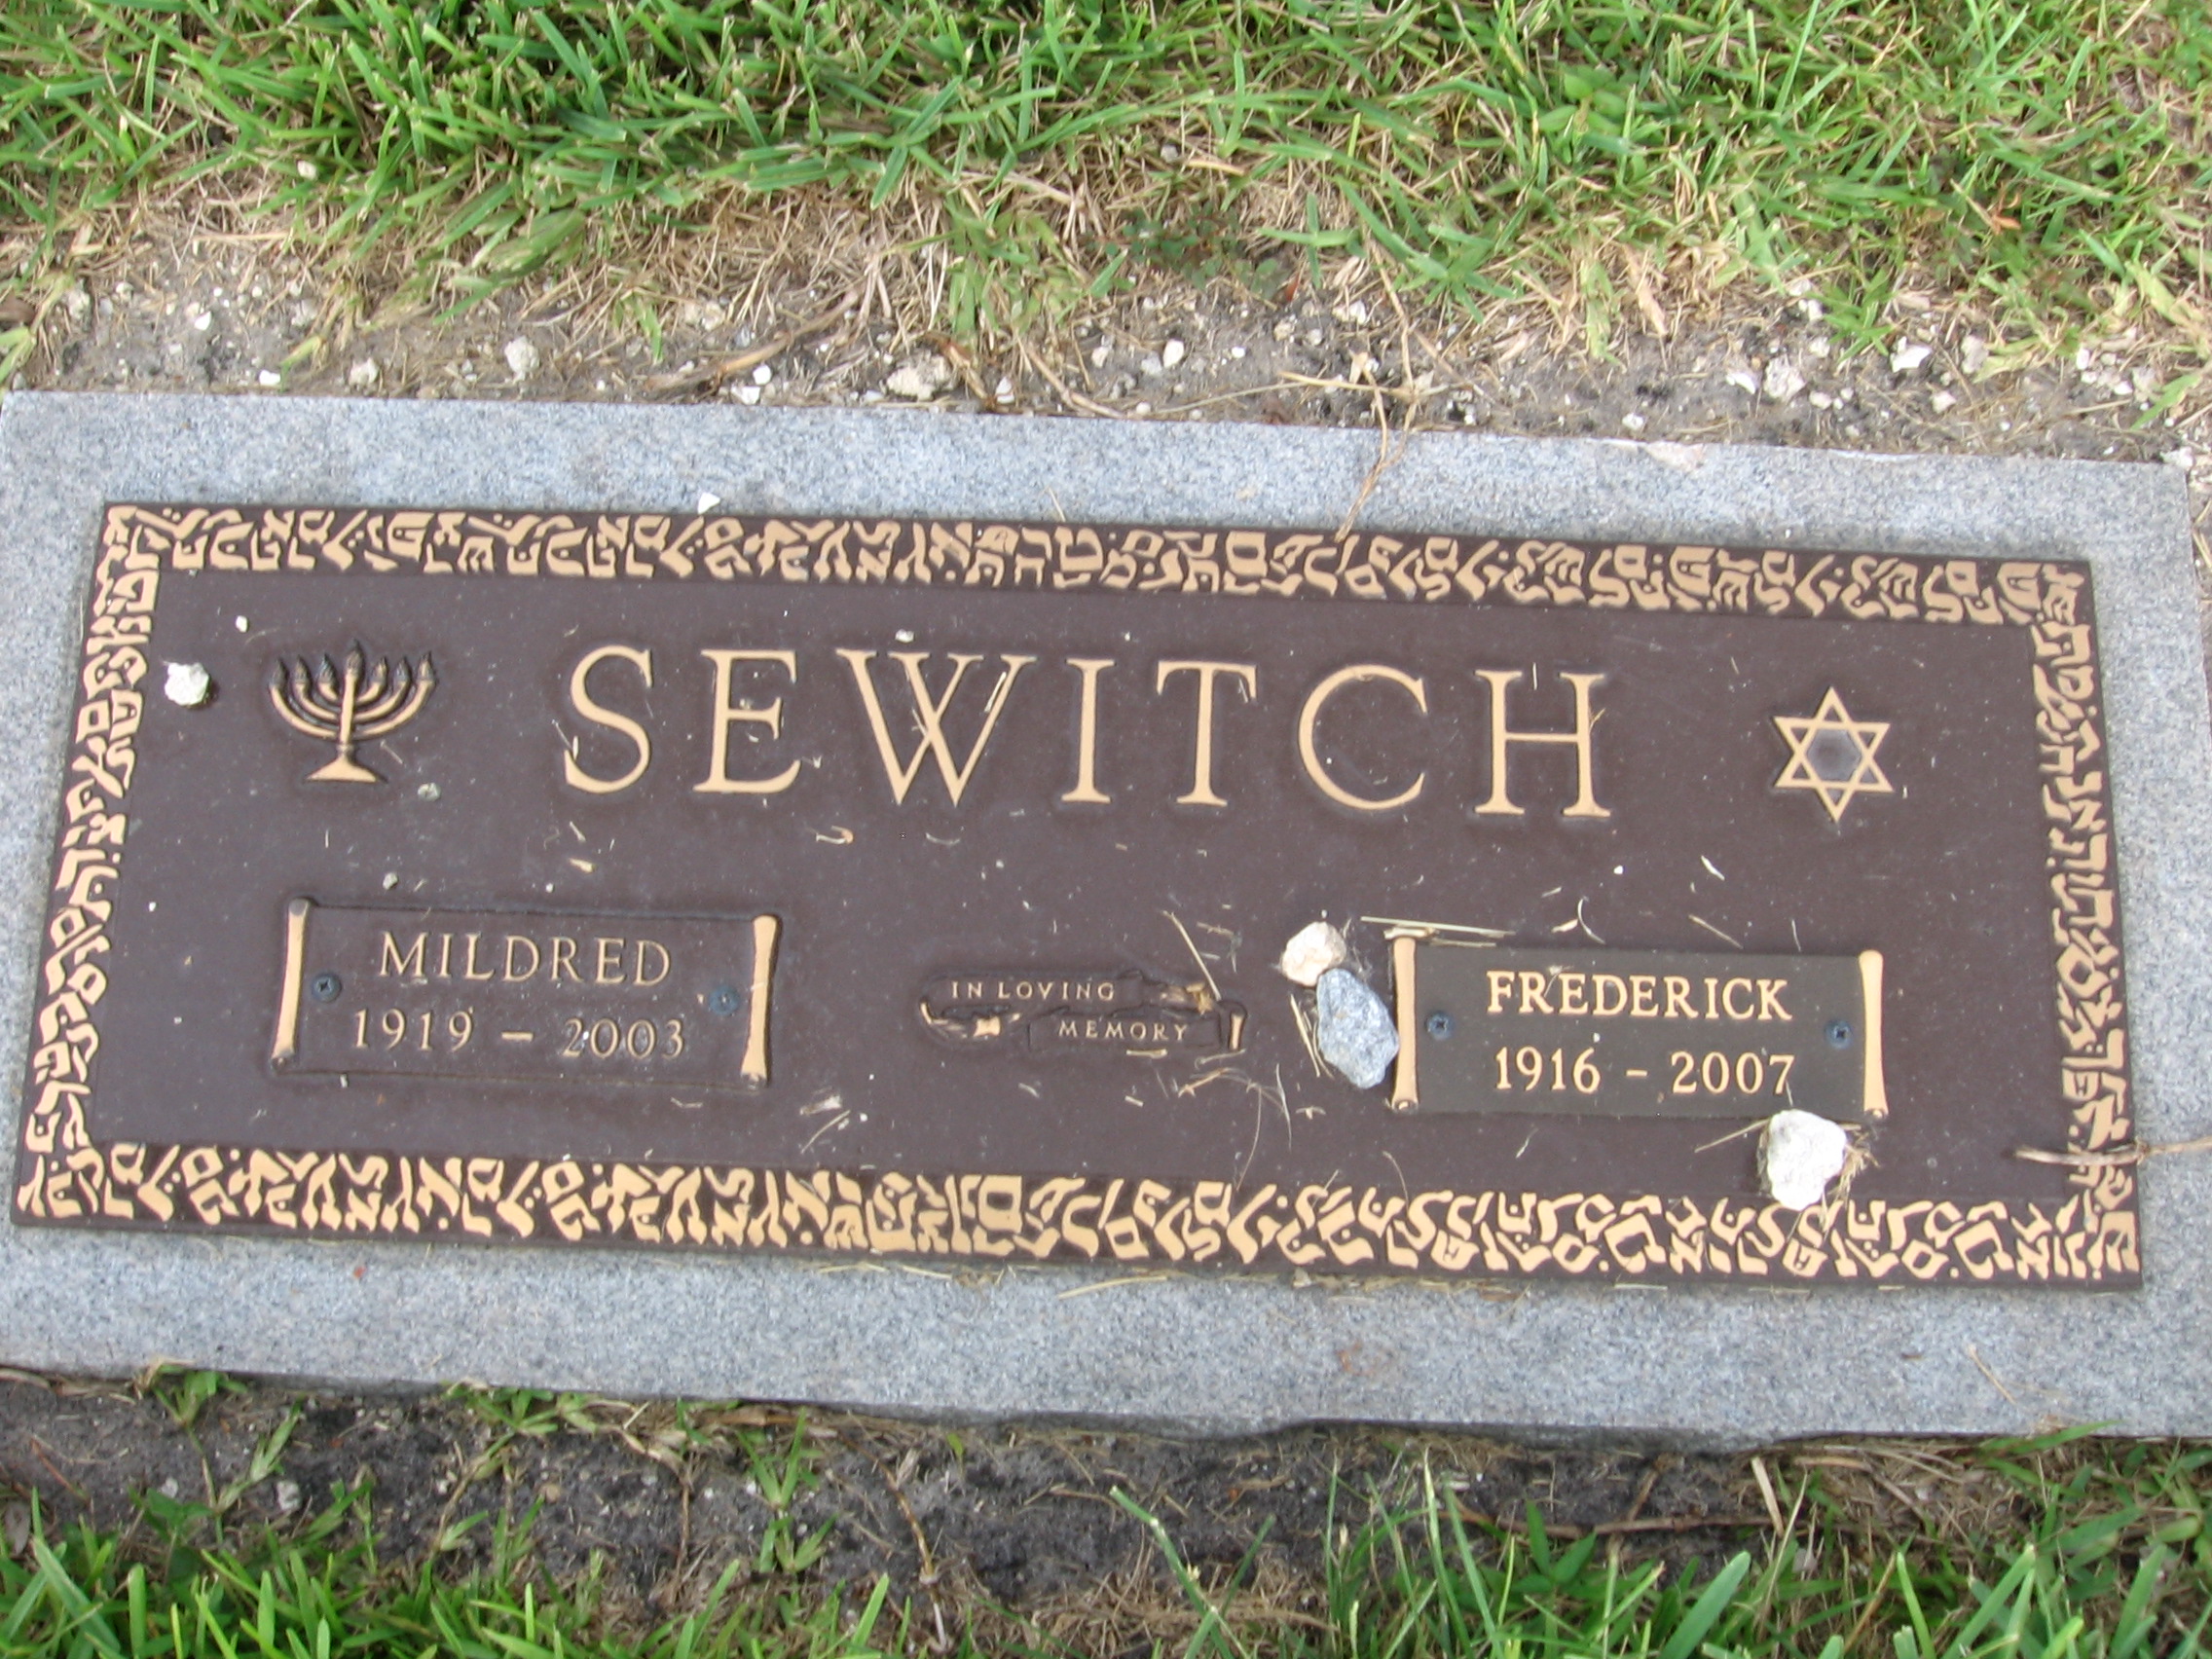 Frederick Sewitch